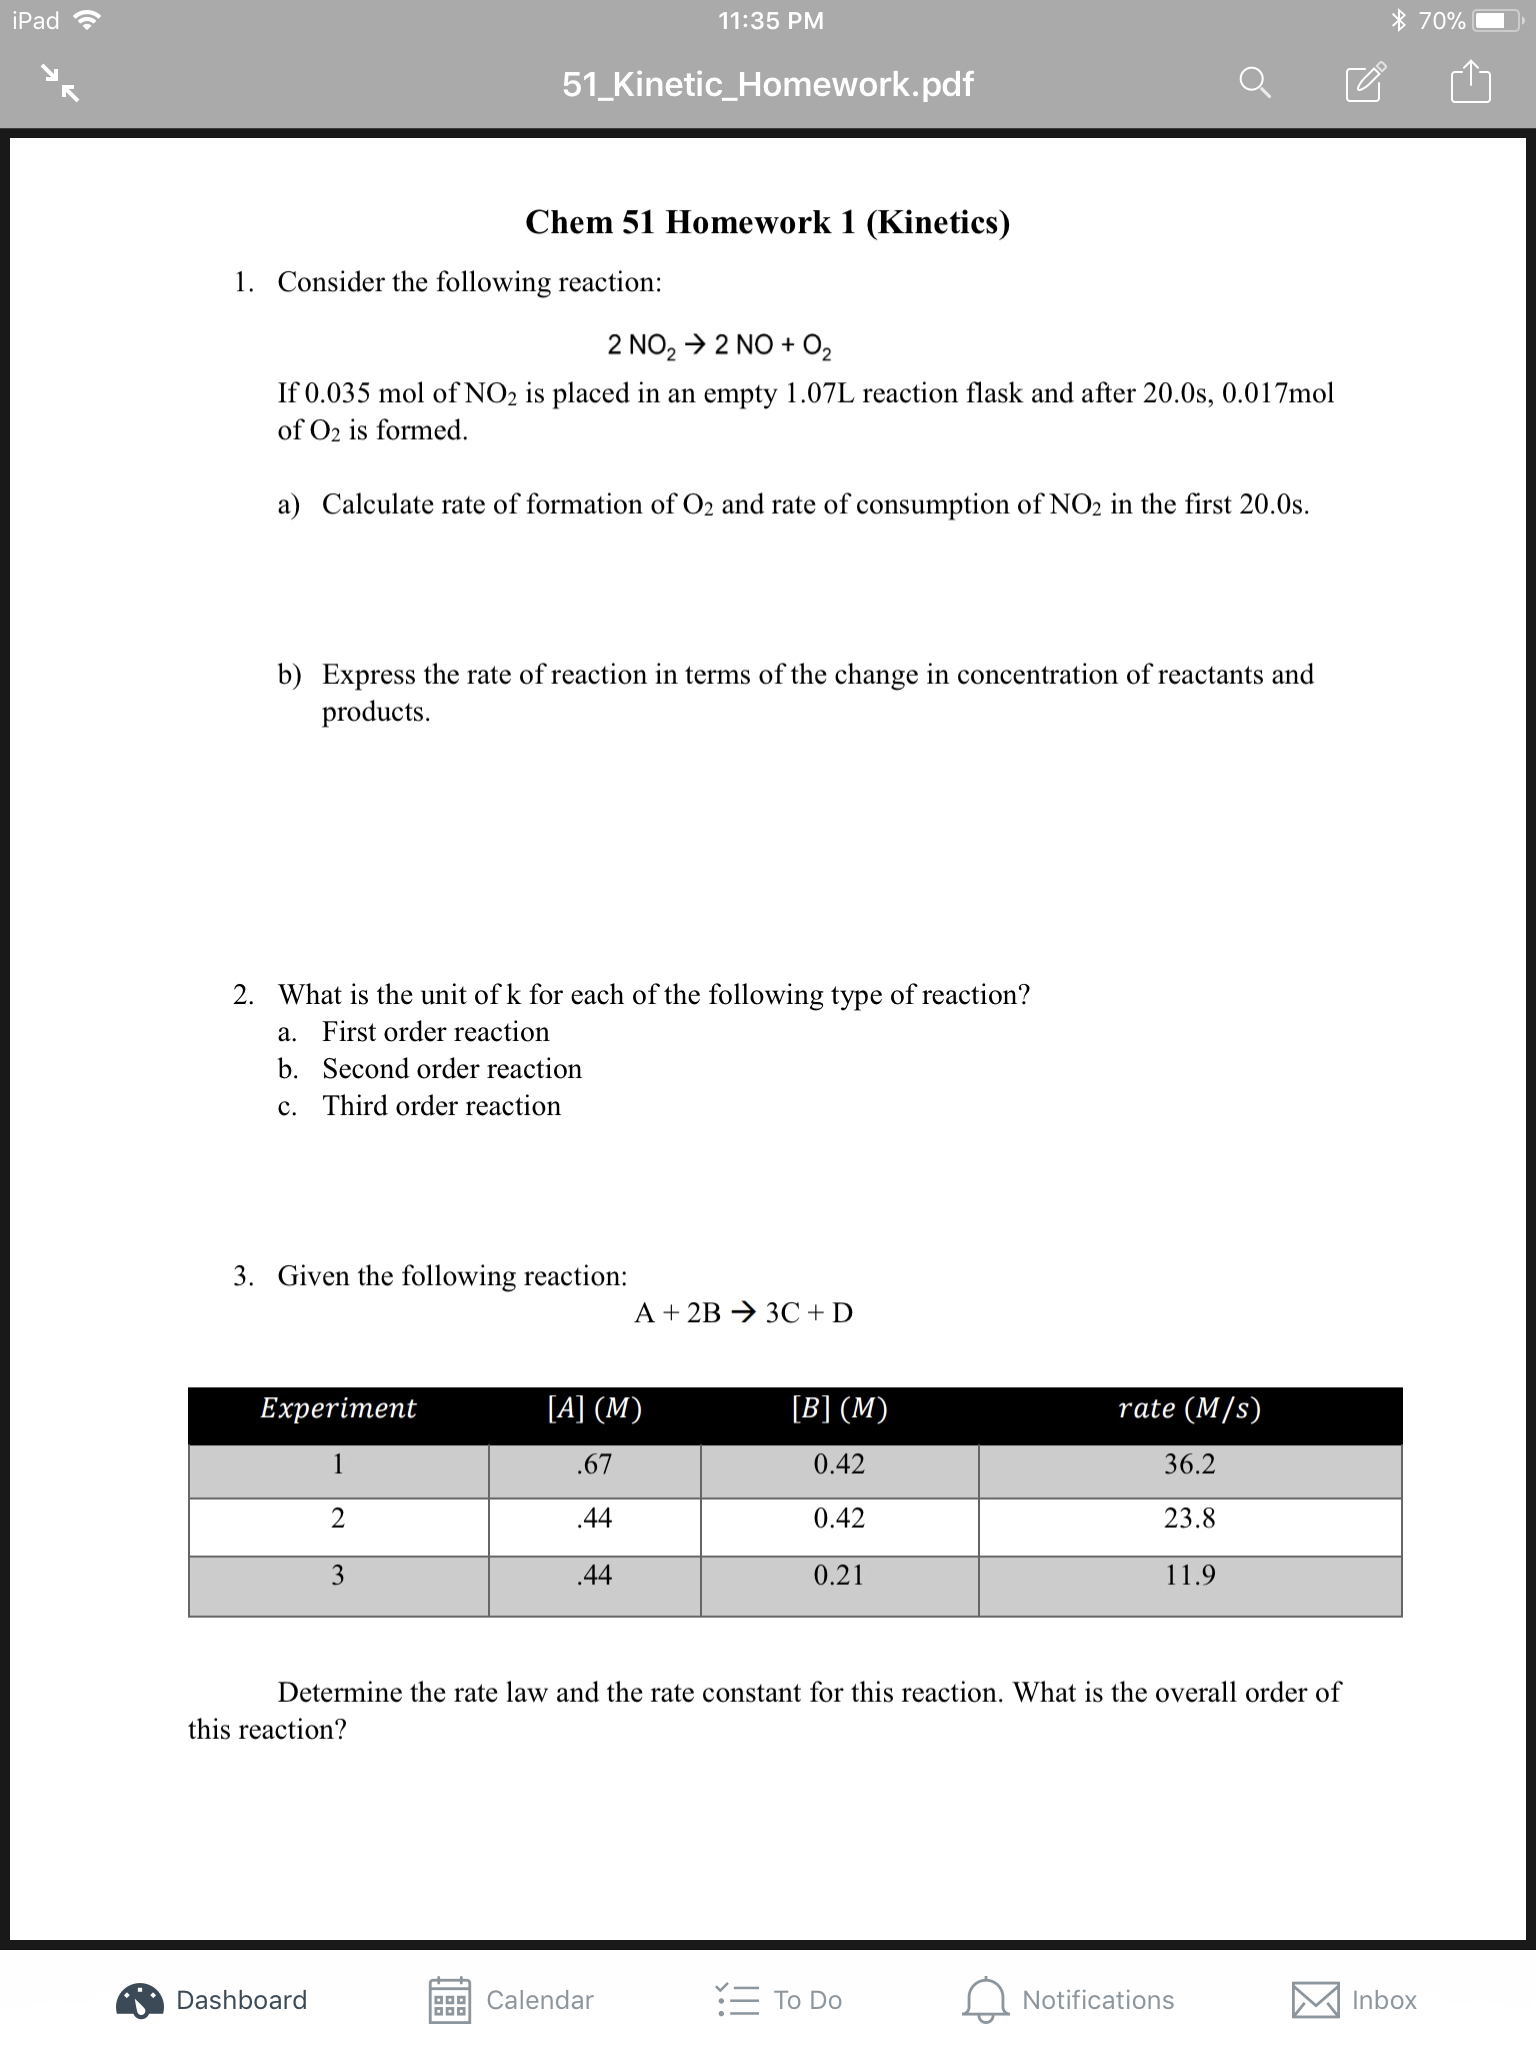 70%
iPad
11:35 PM
51_Kinetic_Homework.pdf
Chem 51 Homework 1 (Kinetics)
1. Consider the following reaction:
2 NO2 2 NO O2
If 0.035 mol of NO2 is placed in an empty 1.07L reaction flask and after 20.0s, 0.017mol
of O2 is formed
a) Calculate rate of formation of O2 and rate of consumption of NO2 in the first 20.0s
b) Express the rate of reaction in terms of the change in concentration of reactants and
products
2. What is the unit of k for each of the following type of reaction?
a. First order reaction
b.
Second order reaction
c. Third order reaction
3. Given the following reaction:
A 2B
3C D
[B] (M)
rate (M/s)
[A] (M)
Experiment
1
36.2
.67
0.42
2
0.42
23.8
44
11.9
3
44
0.21
Determine the rate law and the rate constant for this reaction. What is the overall order of
this reaction?
To Do
Notifications
Inbox
Dashboard
Calendar
